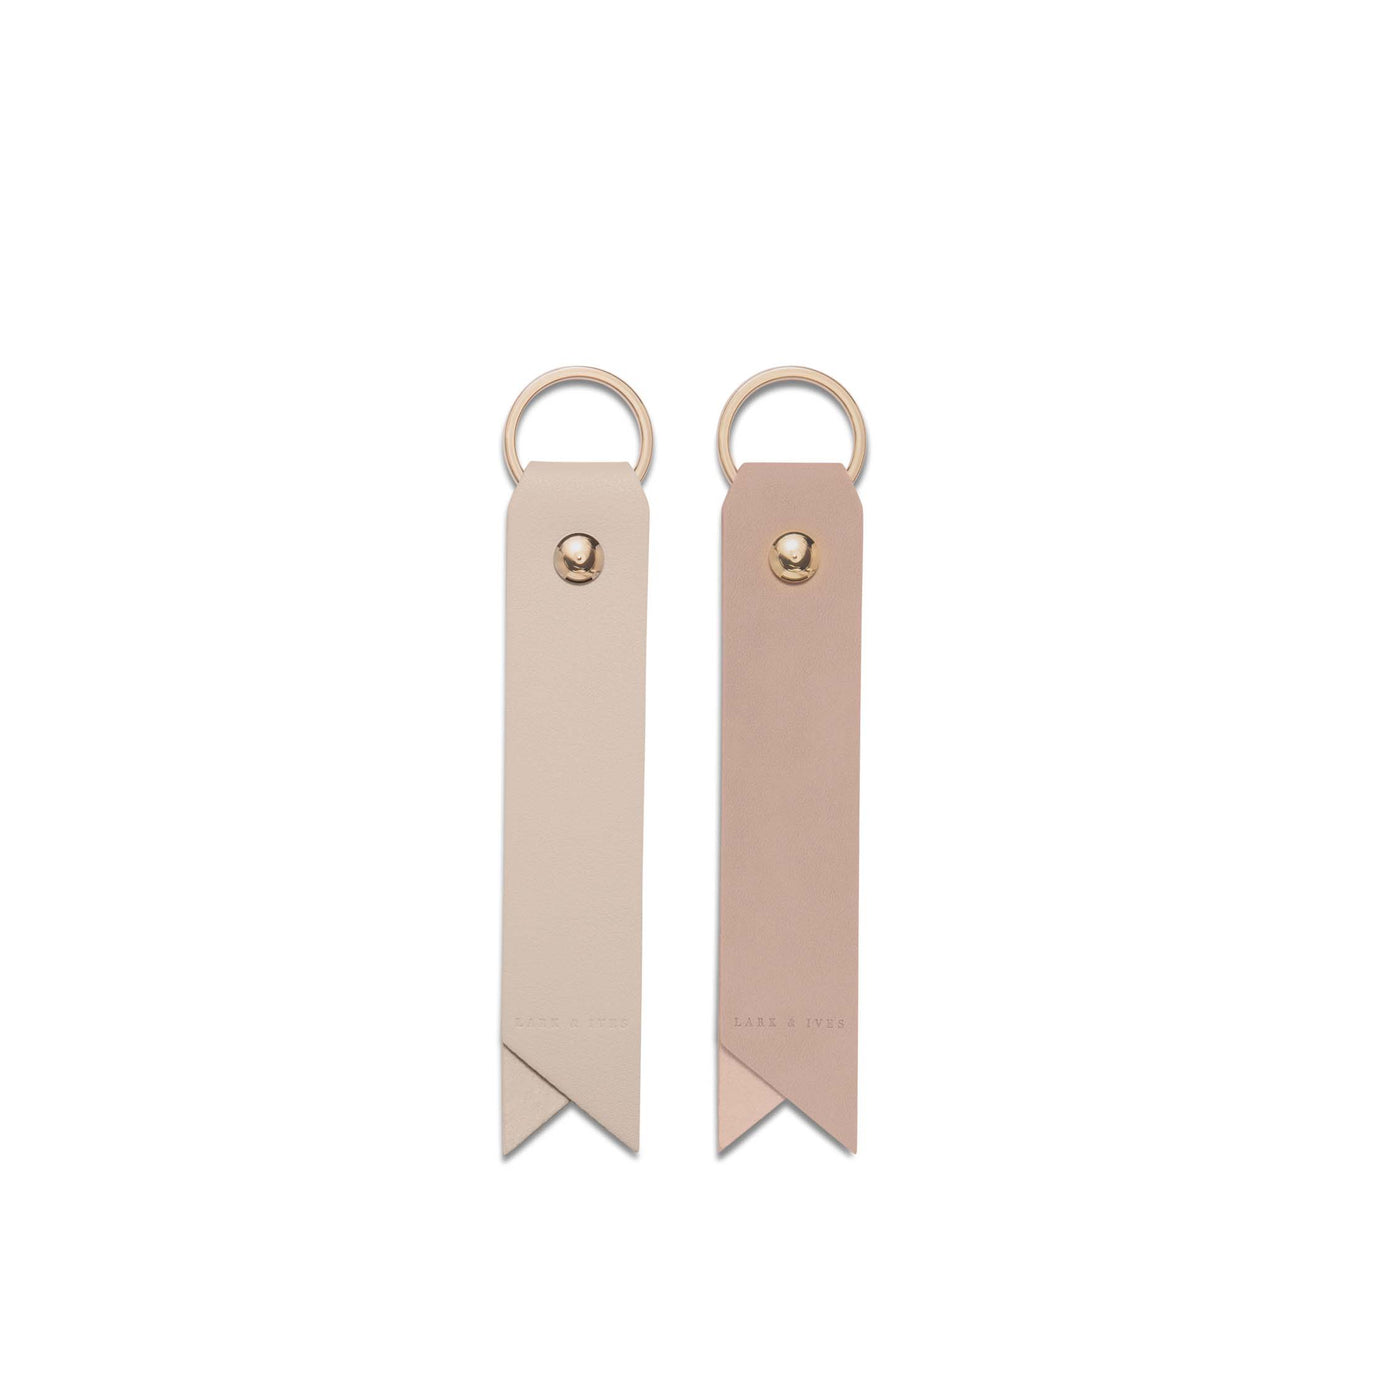 Lark and Ives / Vegan Leather Accessories / Keychain / Keyring / Strap Keychain / Minimal Accessories / Nude Pink / Neutral Colours